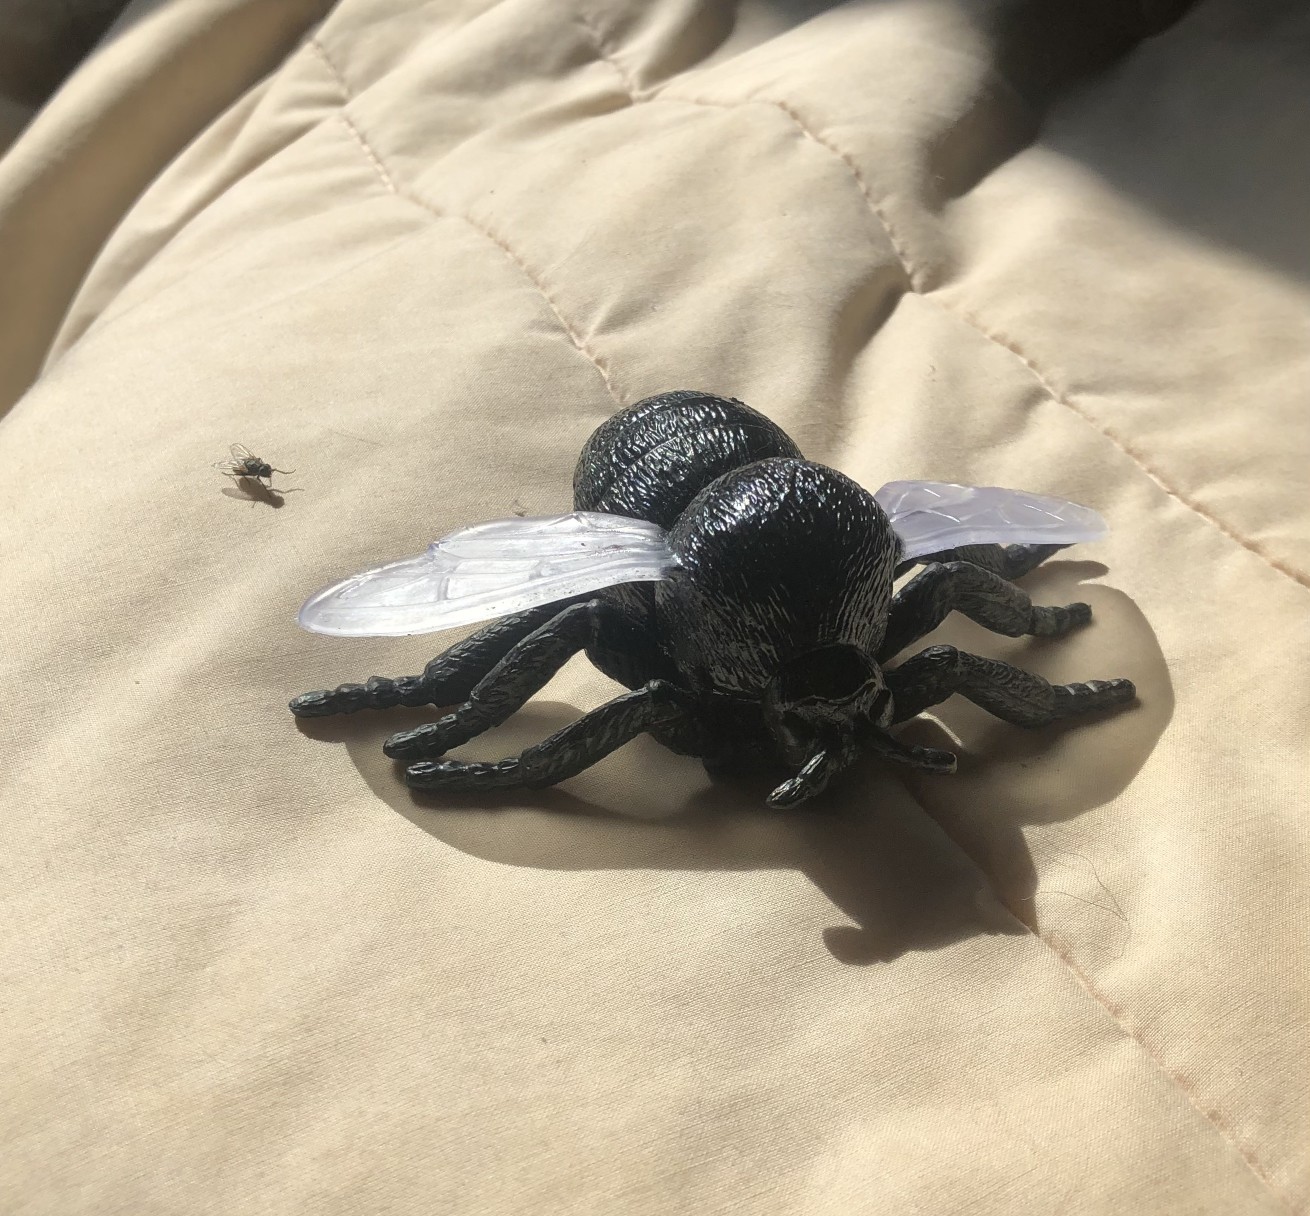 A giant housefly toy, about 3 inches long, sitting on a bed. A housefly is several inches away, pointing at it, or so it looks like. The fly was actually walking towards the toy at the pic, with its arm out. It's like he's pointing at a giant statue of himself.